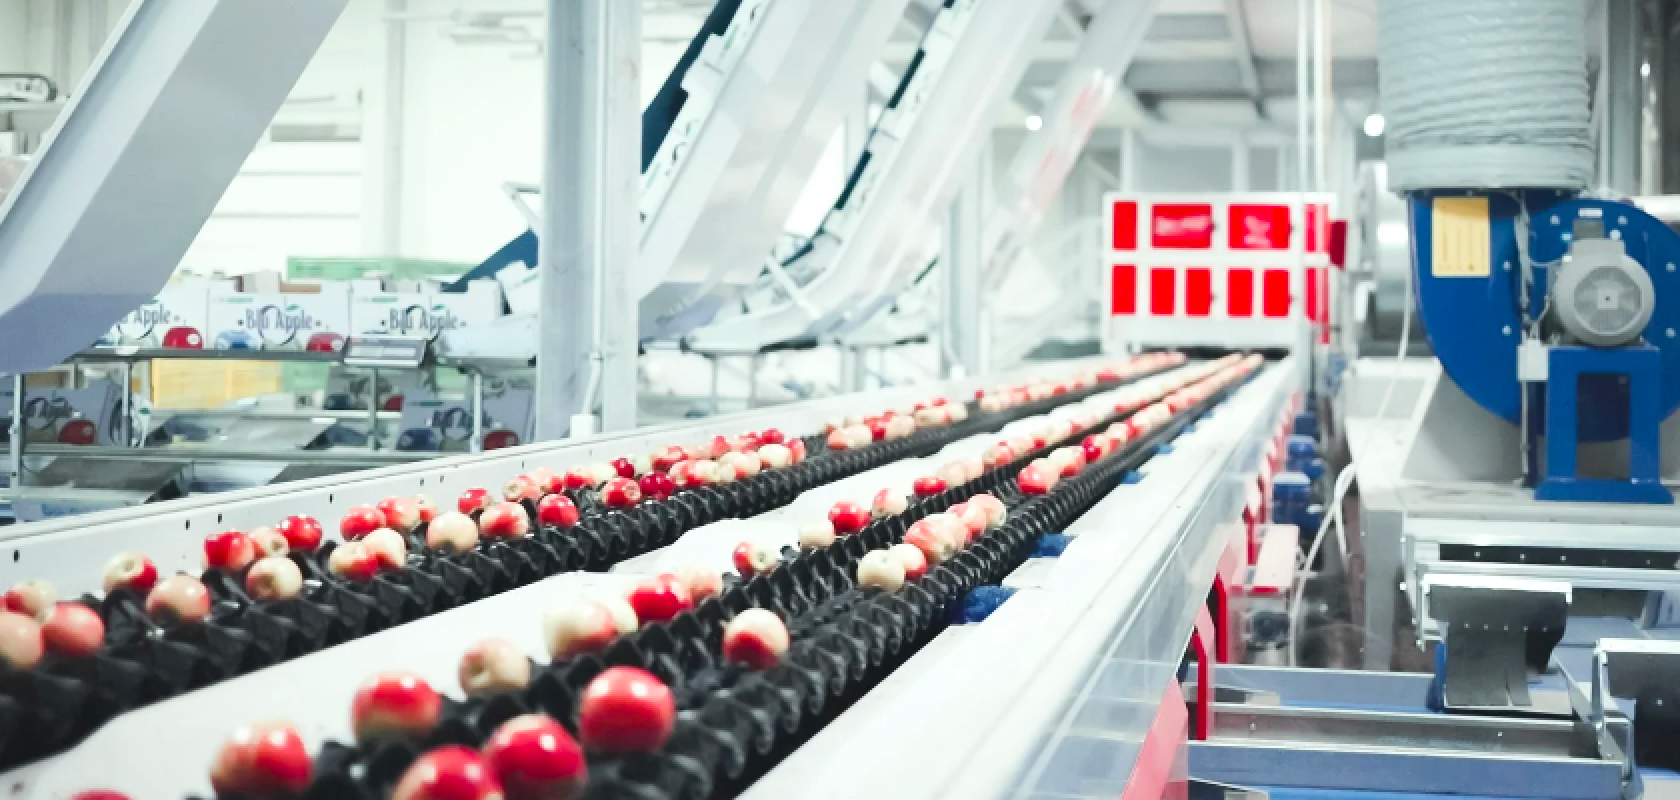 The new spectroscopy approach could help to analyse the spectral data of apple species benefitting industrial processes. (Image: Quadra Machinery) 